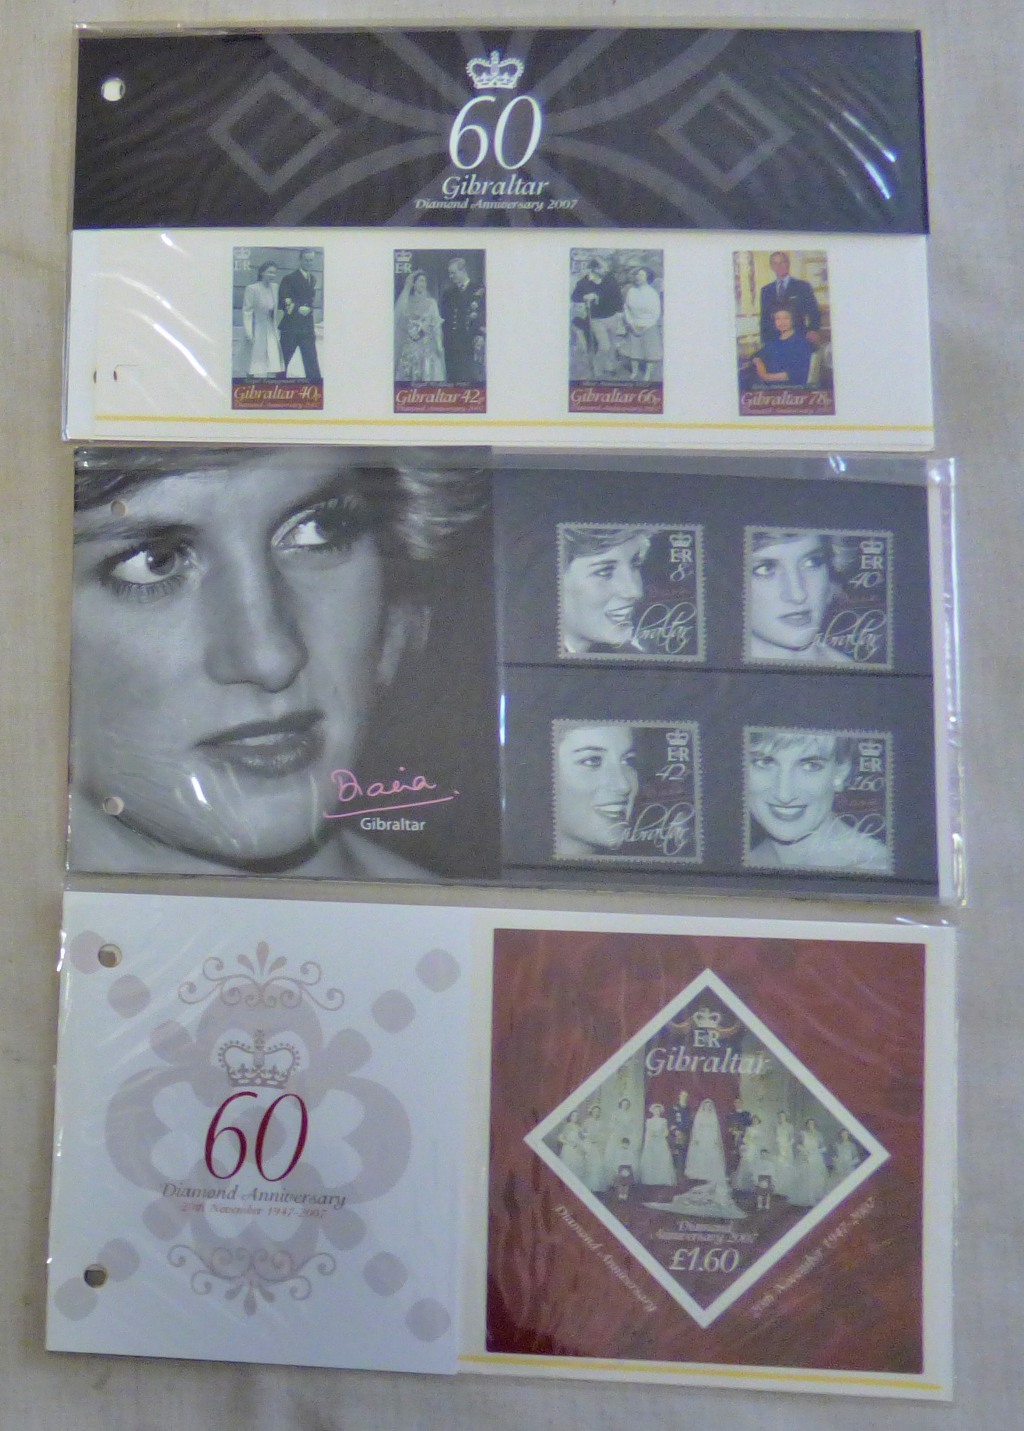 Gibraltar 2007 Diana Princess of Wales, H.M. The Queen's 60th Diamond Anniversary, 50th and Min - Image 2 of 2